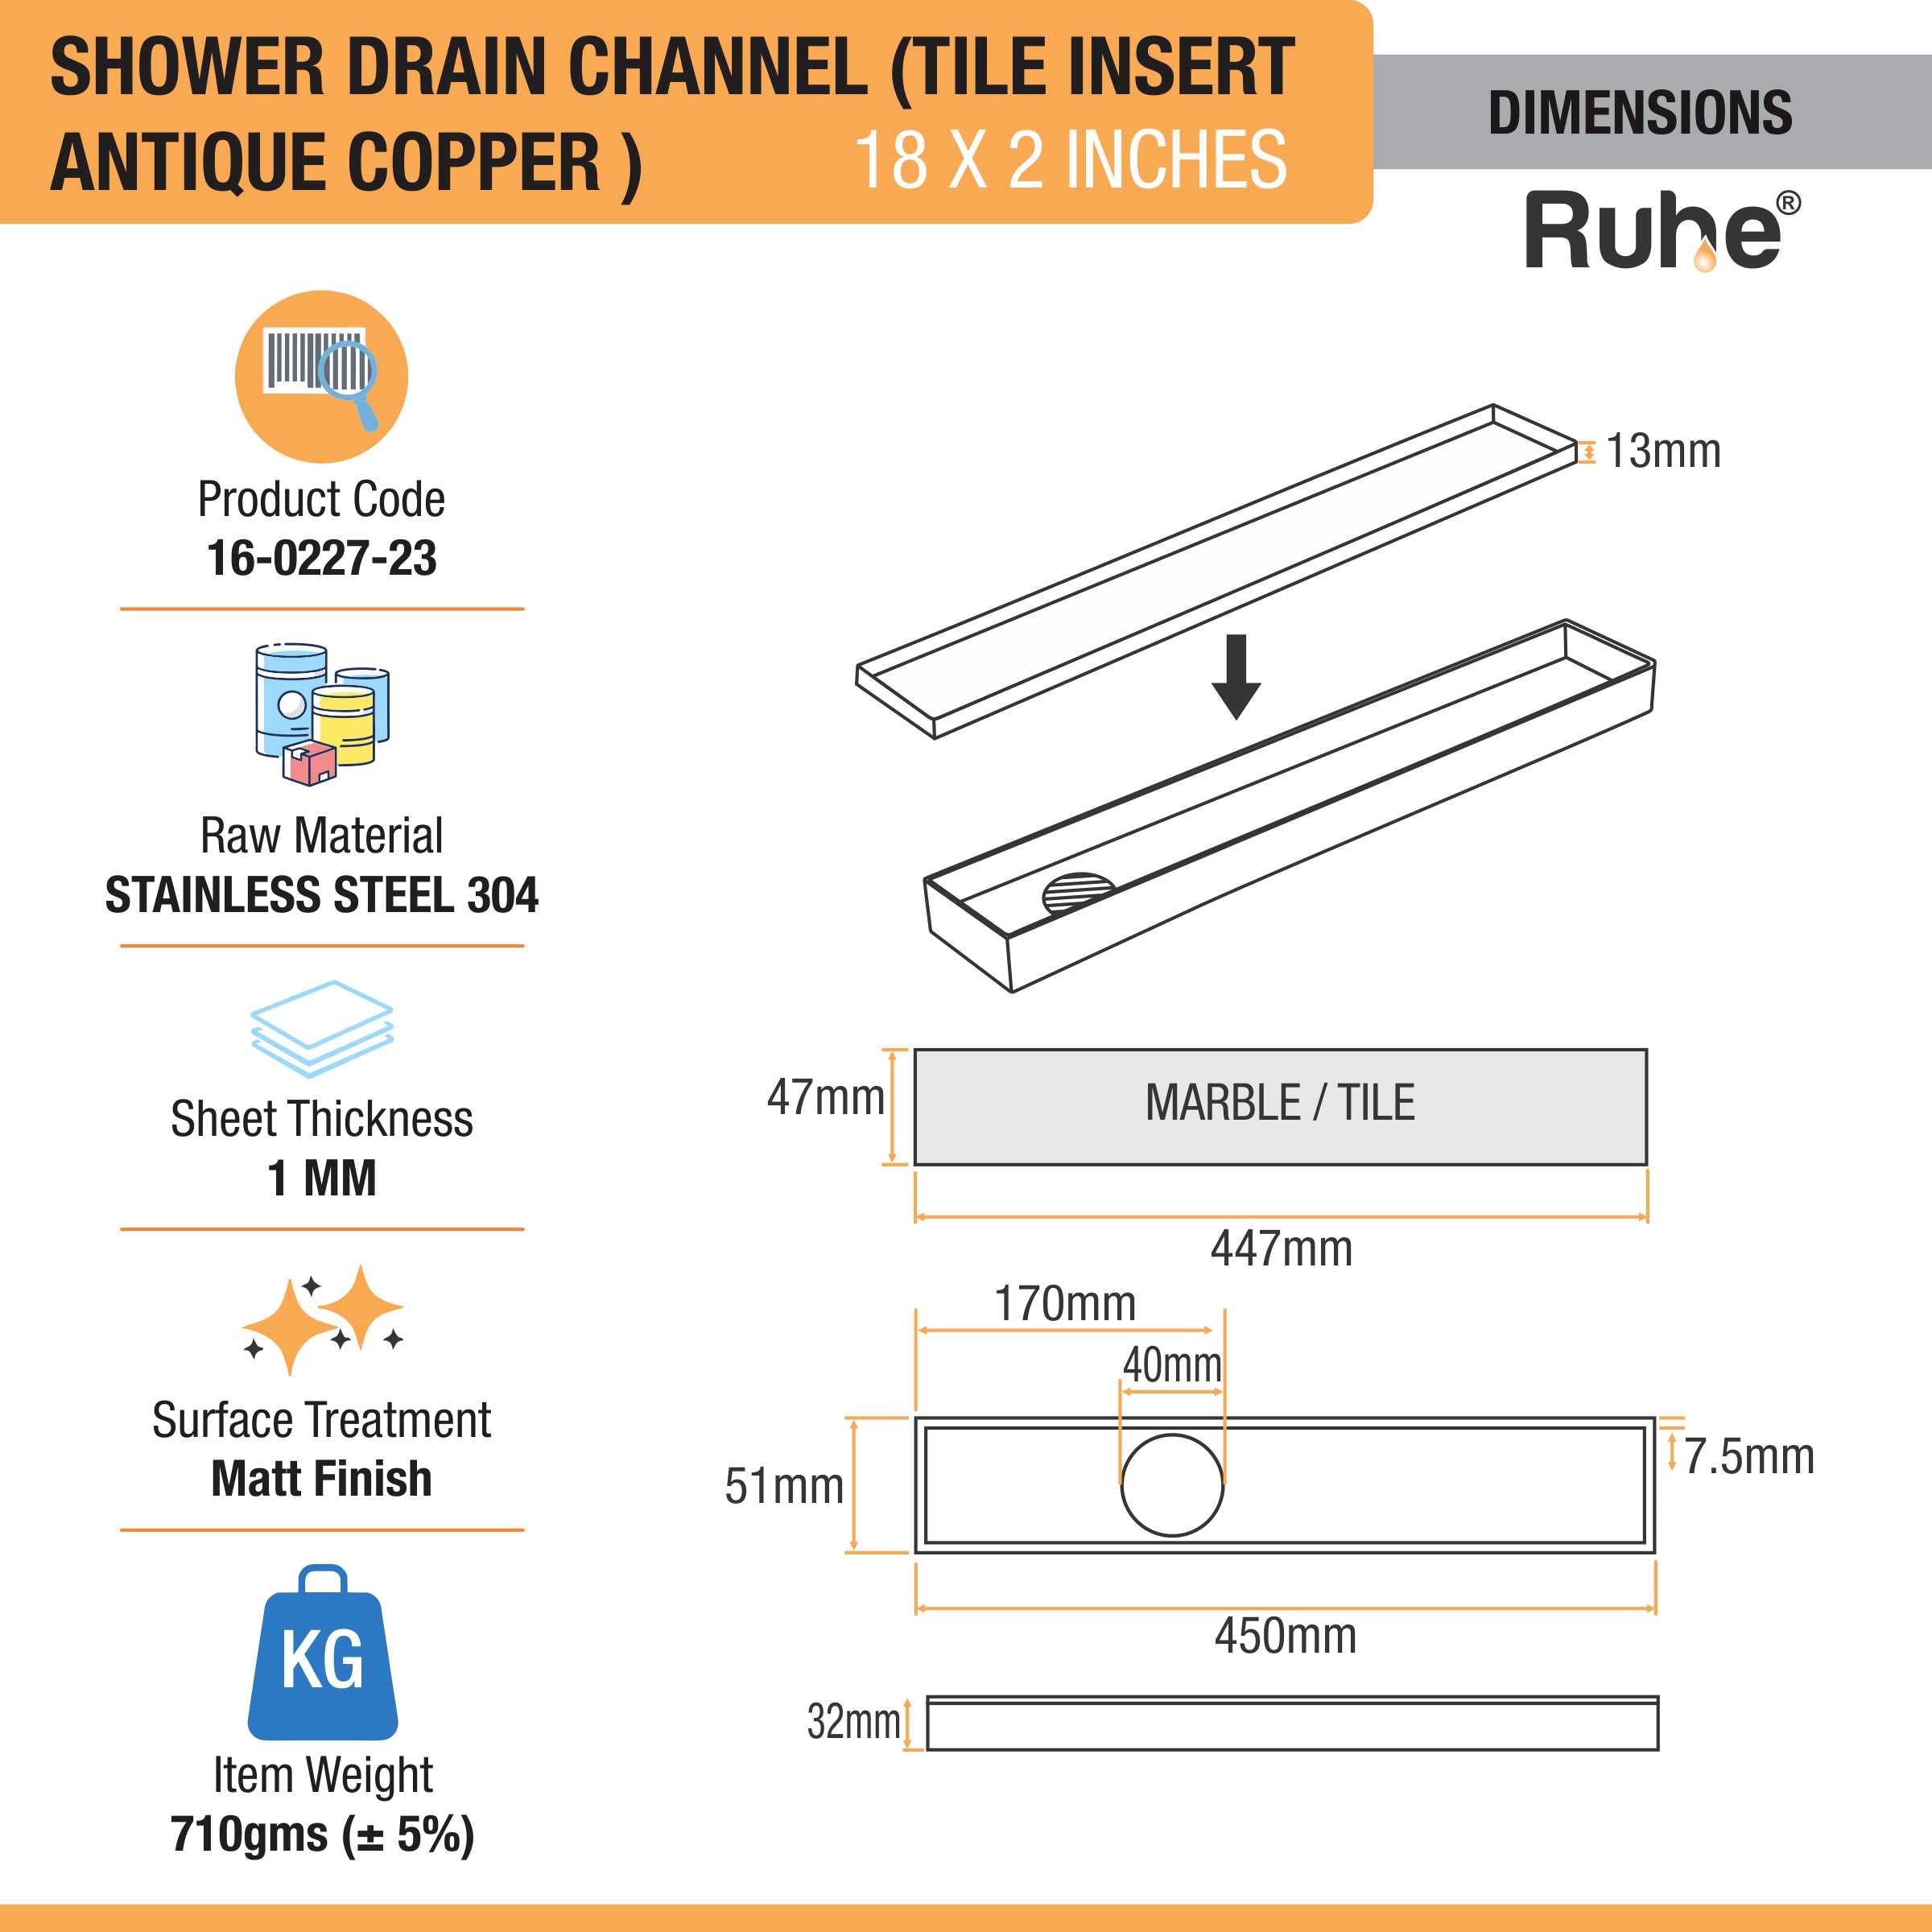 Tile Insert Shower Drain Channel (18 x 2 Inches) ROSE GOLD/ANTIQUE COPPER dimensions and size